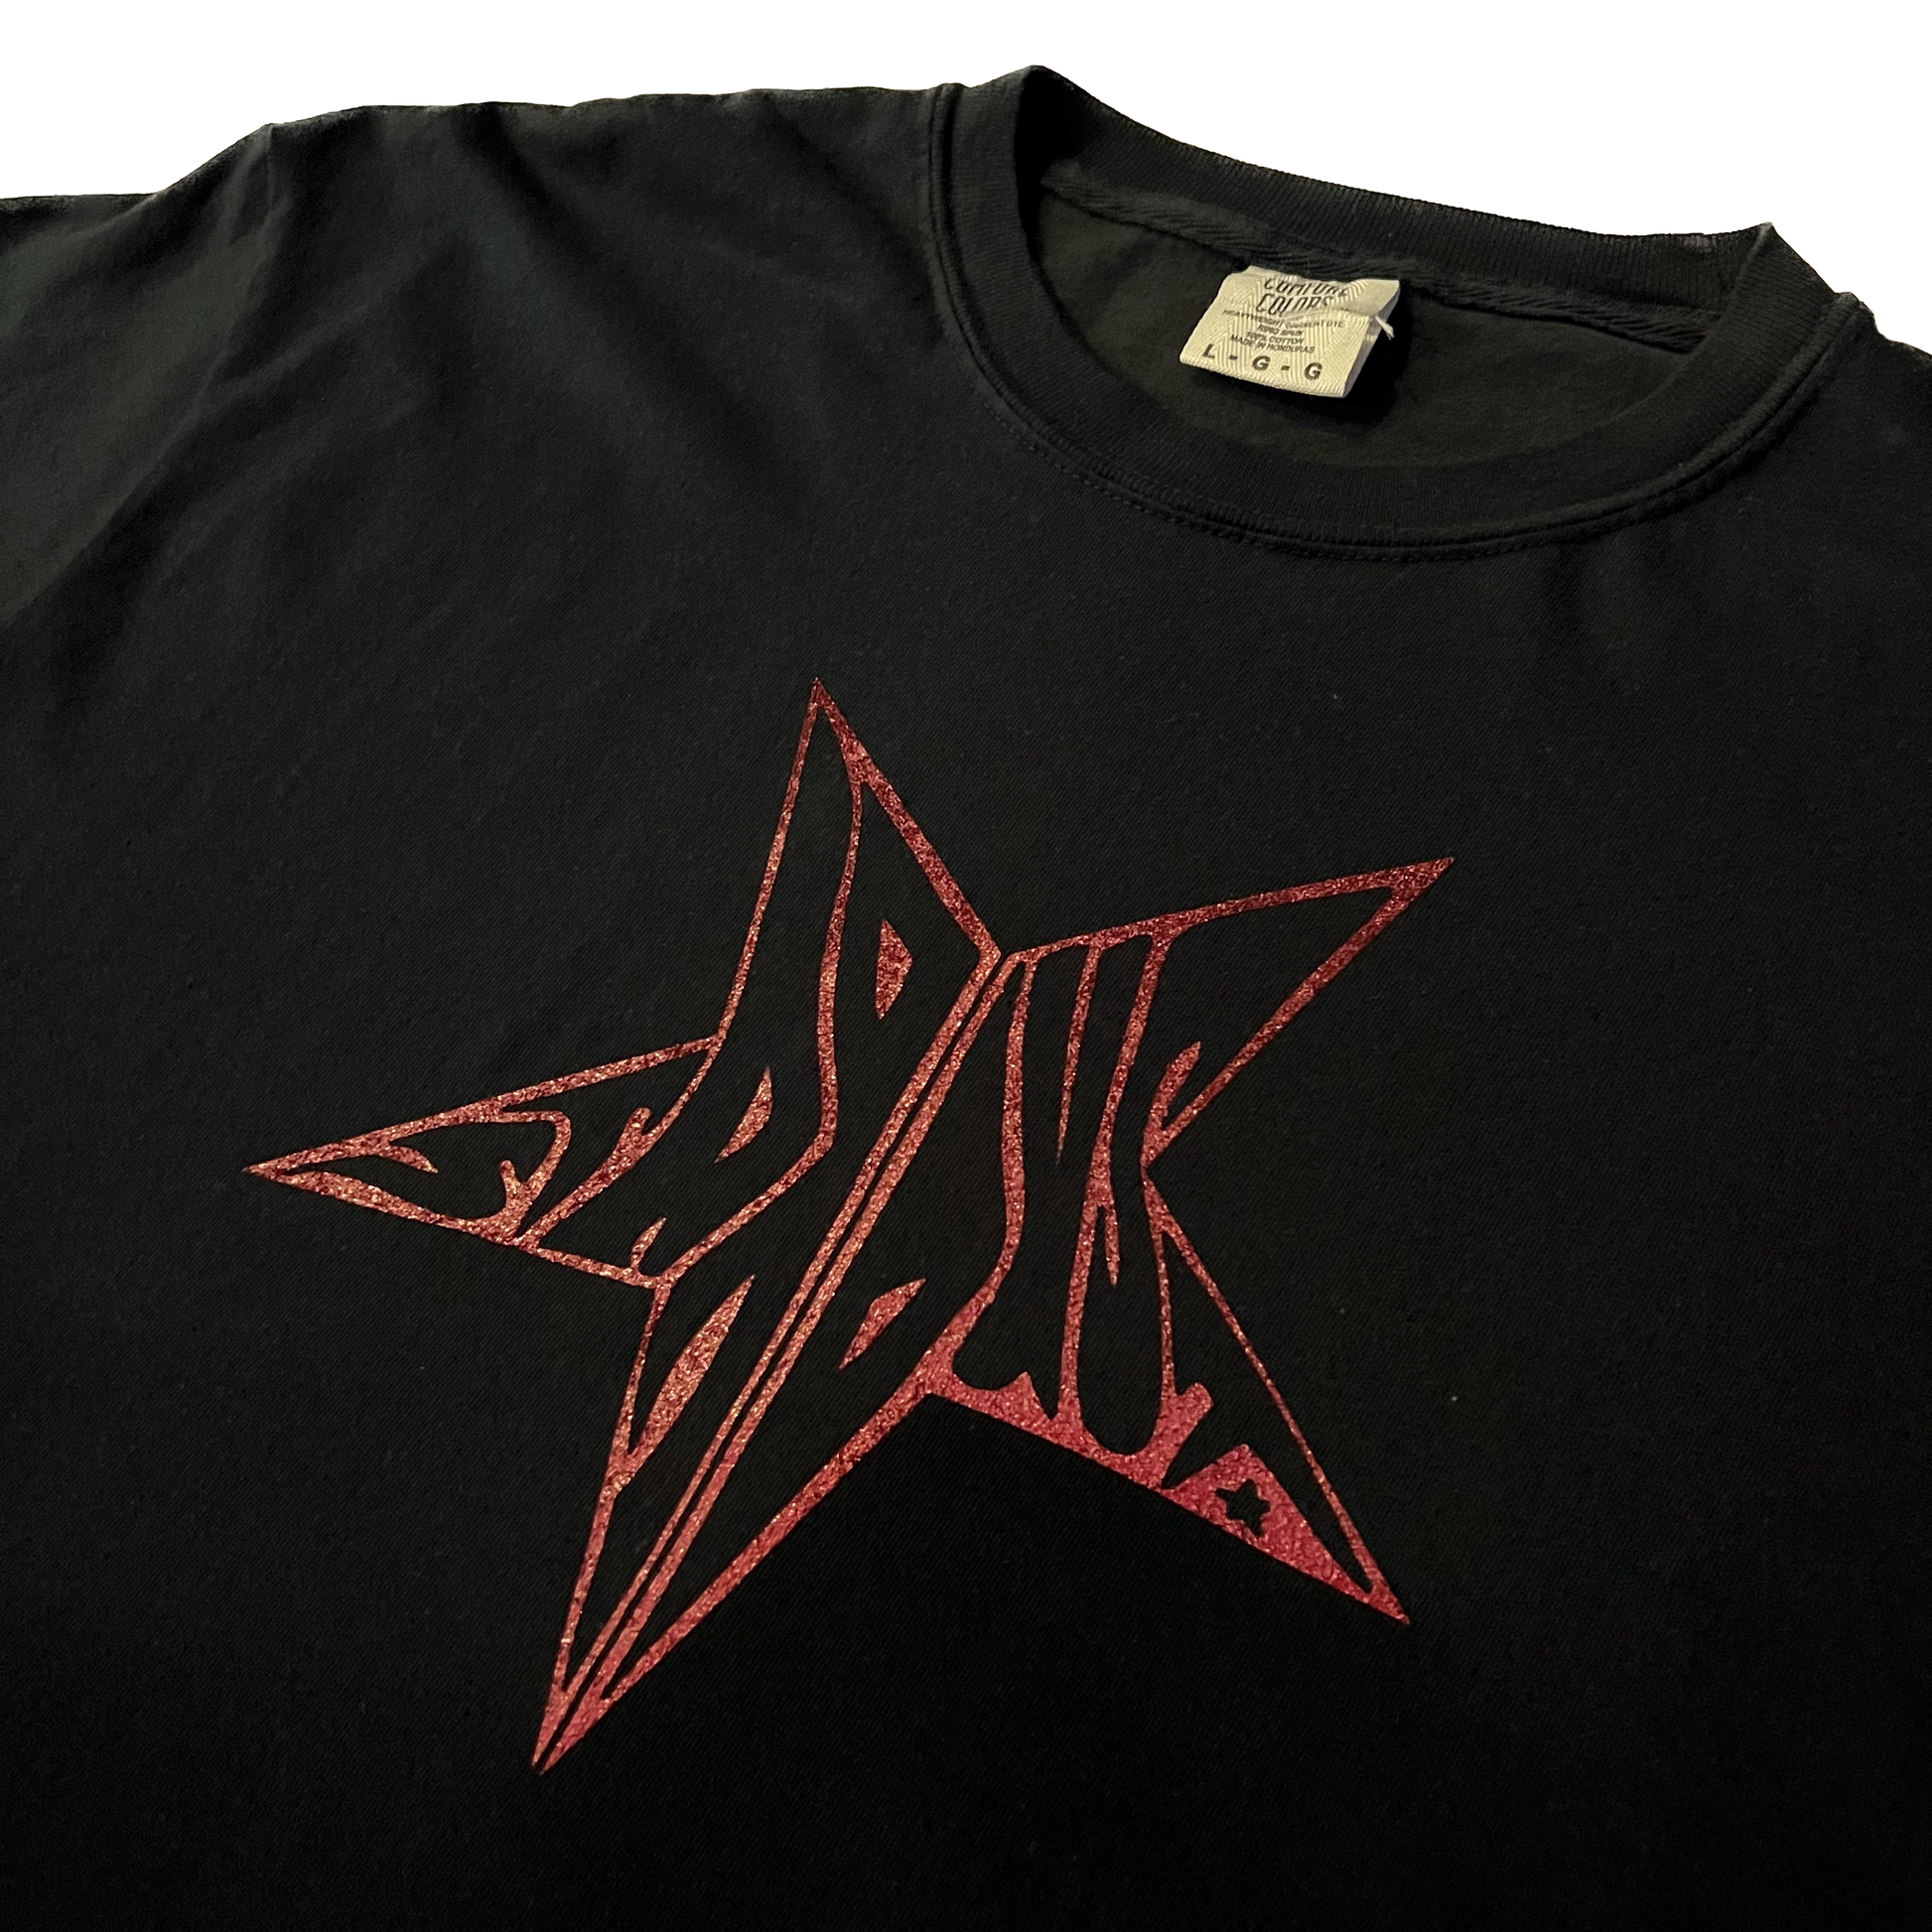 Stardust Skate Shop Red Shimmer Star Tee 026 - Assorted Colors - 6.1 oz